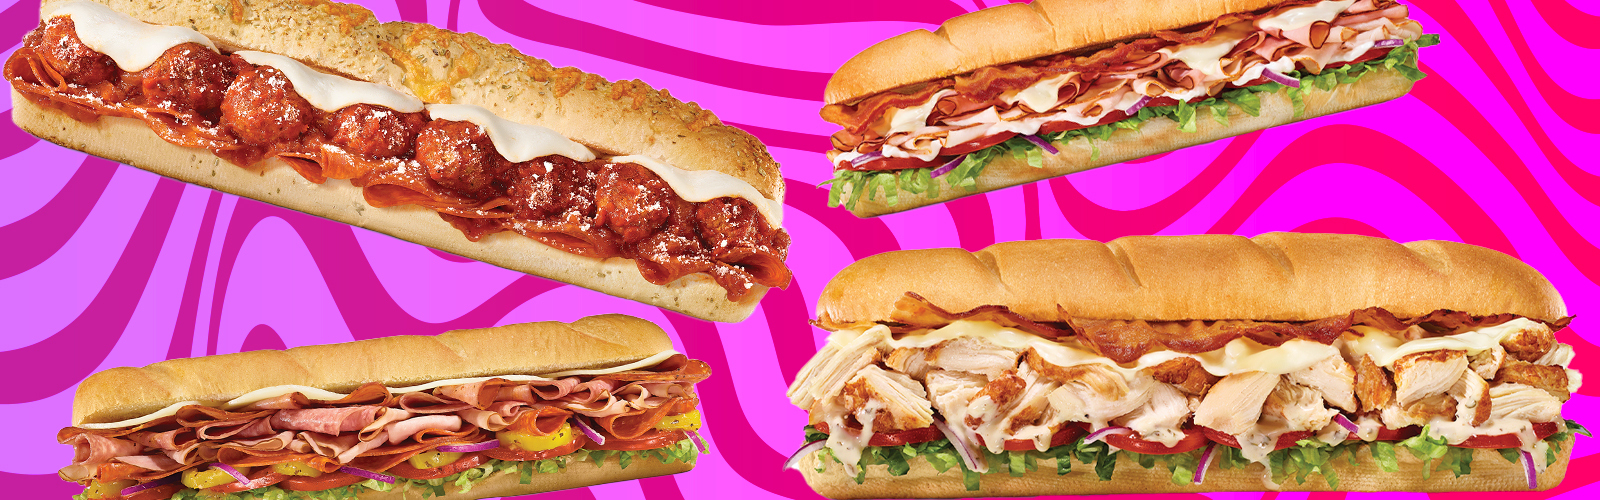 The Best Subway Sandwiches, Ranked From Worst to Best